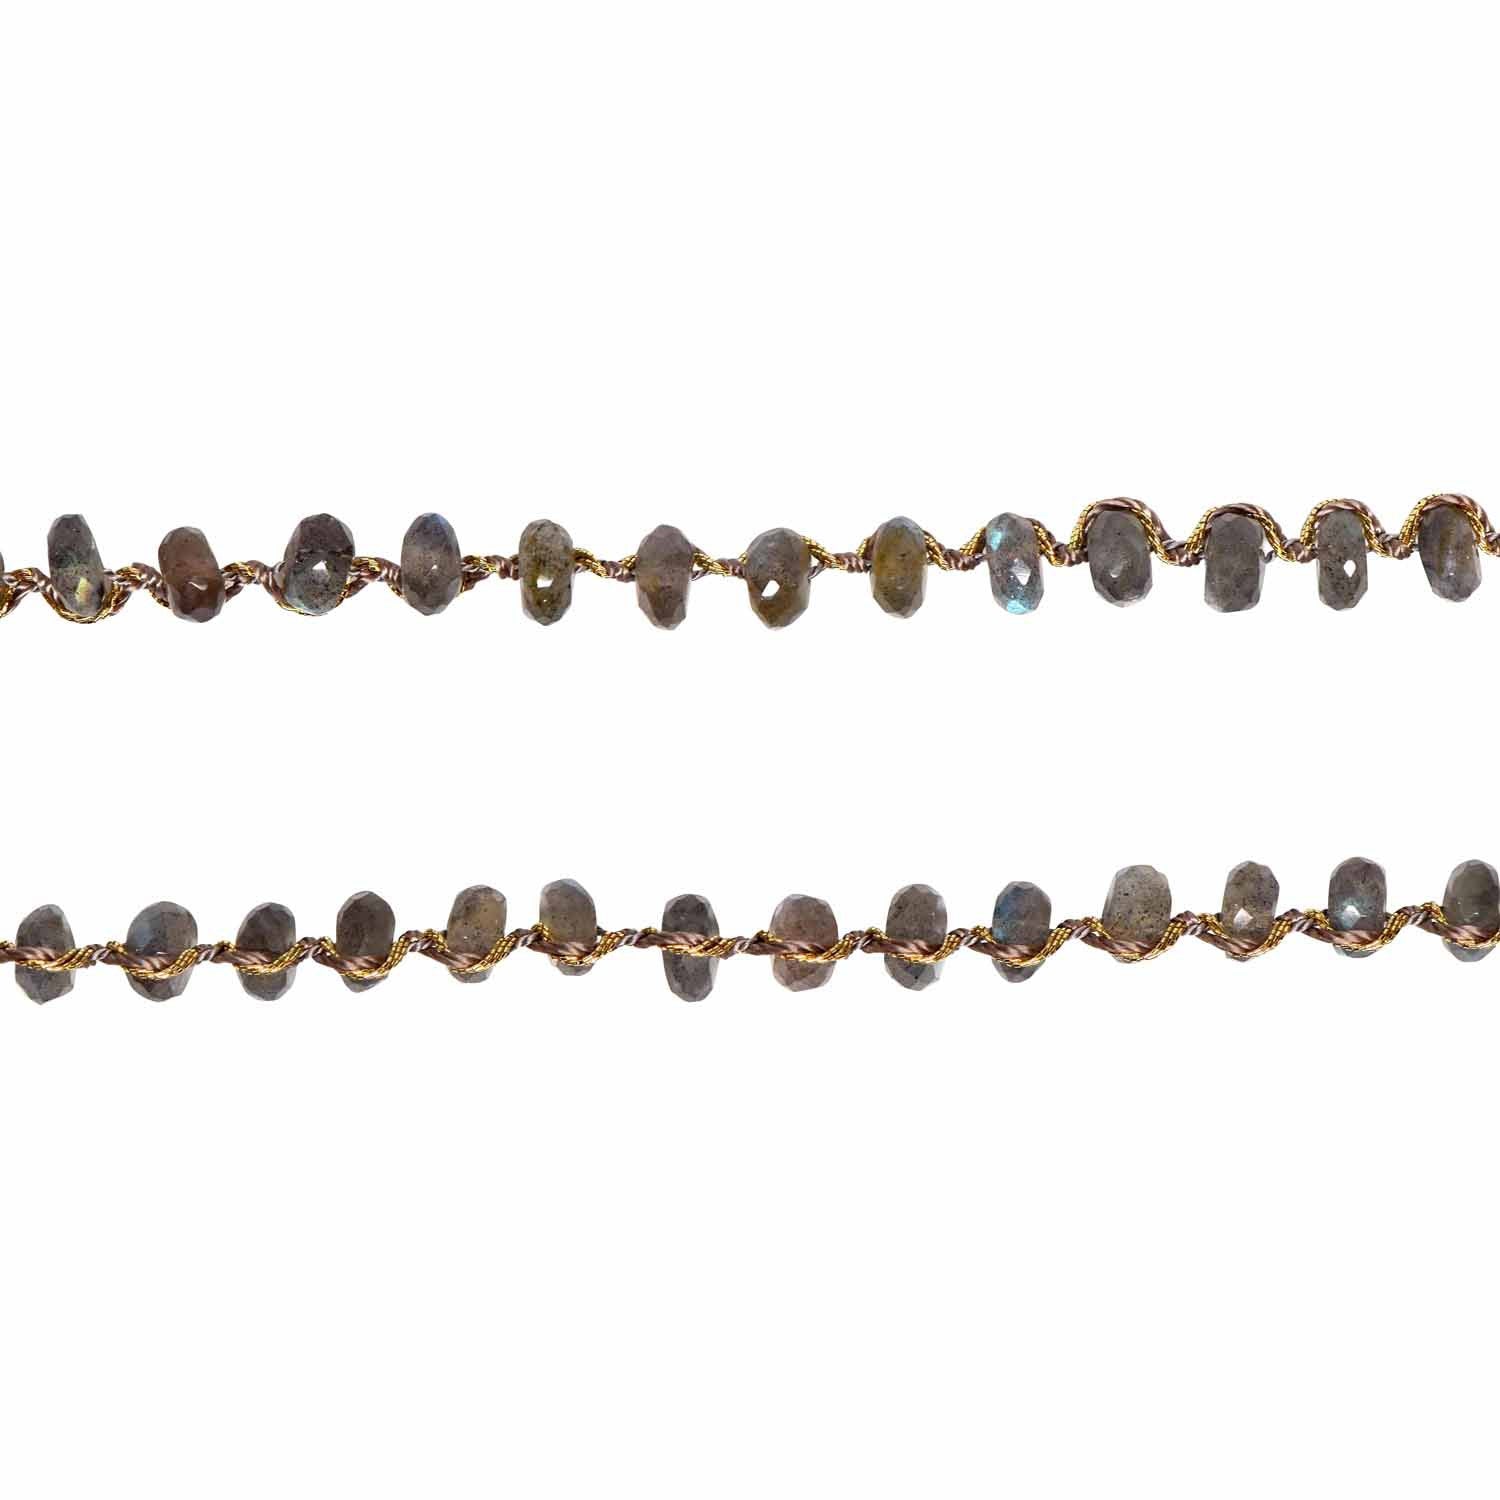 Woven Long Necklace in Chunky Labradorite | Classic Weave